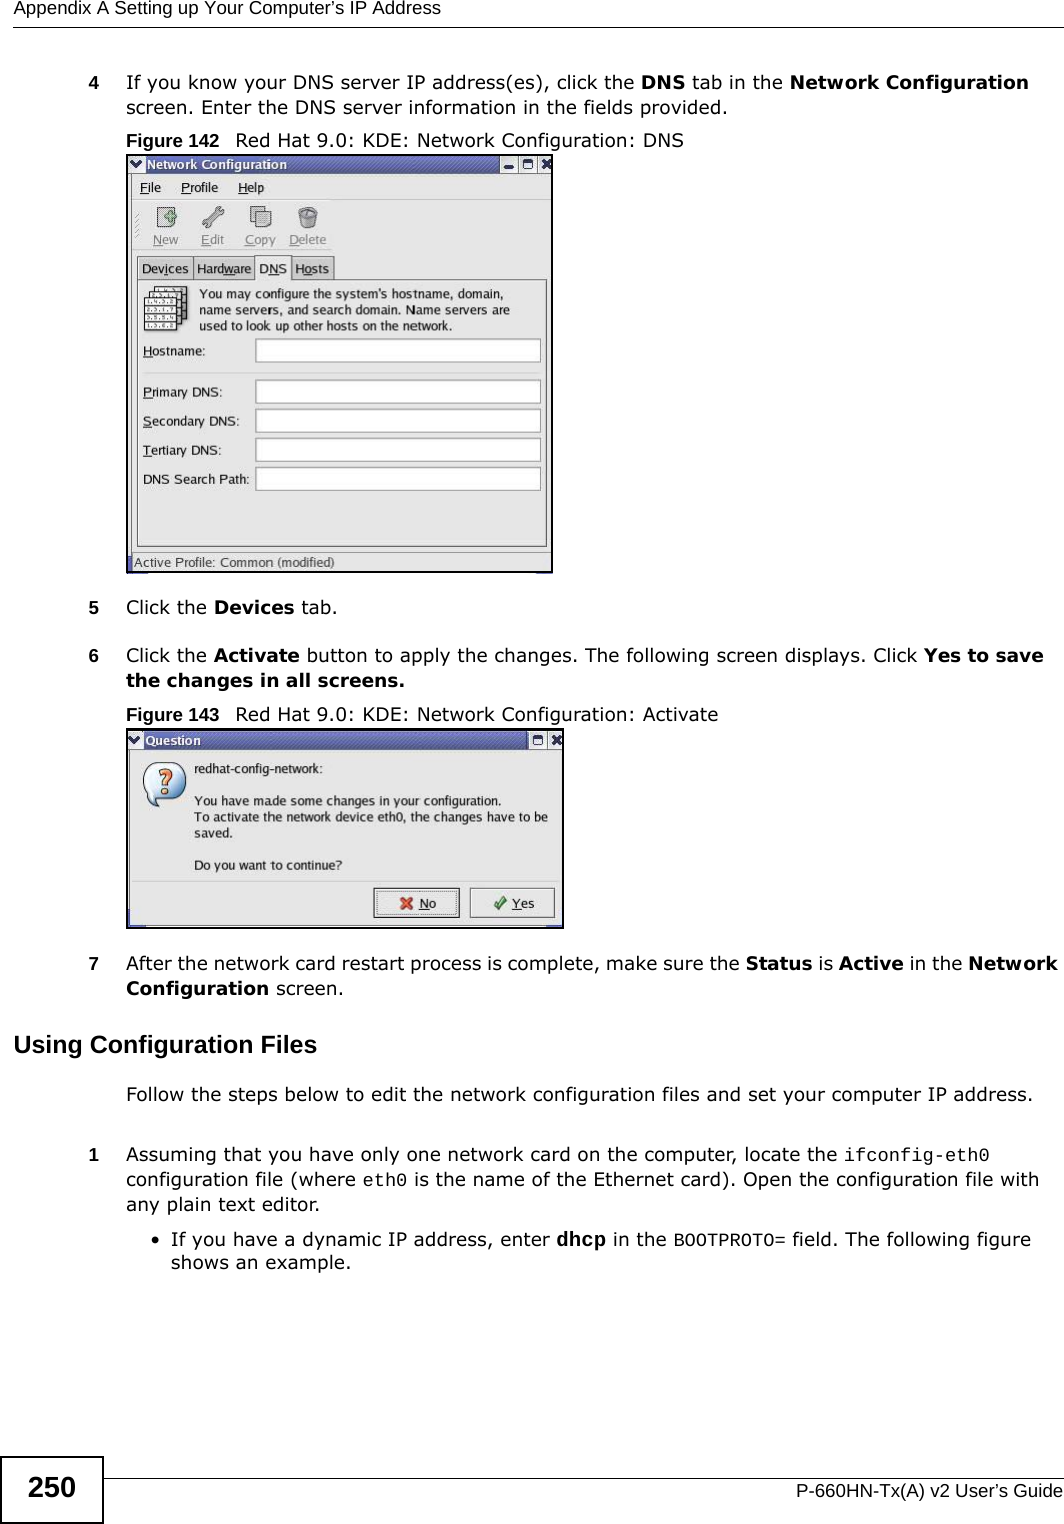 Appendix A Setting up Your Computer’s IP AddressP-660HN-Tx(A) v2 User’s Guide2504If you know your DNS server IP address(es), click the DNS tab in the Network Configuration screen. Enter the DNS server information in the fields provided. Figure 142   Red Hat 9.0: KDE: Network Configuration: DNS 5Click the Devices tab. 6Click the Activate button to apply the changes. The following screen displays. Click Yes to save the changes in all screens.Figure 143   Red Hat 9.0: KDE: Network Configuration: Activate  7After the network card restart process is complete, make sure the Status is Active in the Network Configuration screen.Using Configuration FilesFollow the steps below to edit the network configuration files and set your computer IP address. 1Assuming that you have only one network card on the computer, locate the ifconfig-eth0 configuration file (where eth0 is the name of the Ethernet card). Open the configuration file with any plain text editor.• If you have a dynamic IP address, enter dhcp in the BOOTPROTO= field. The following figure shows an example. 